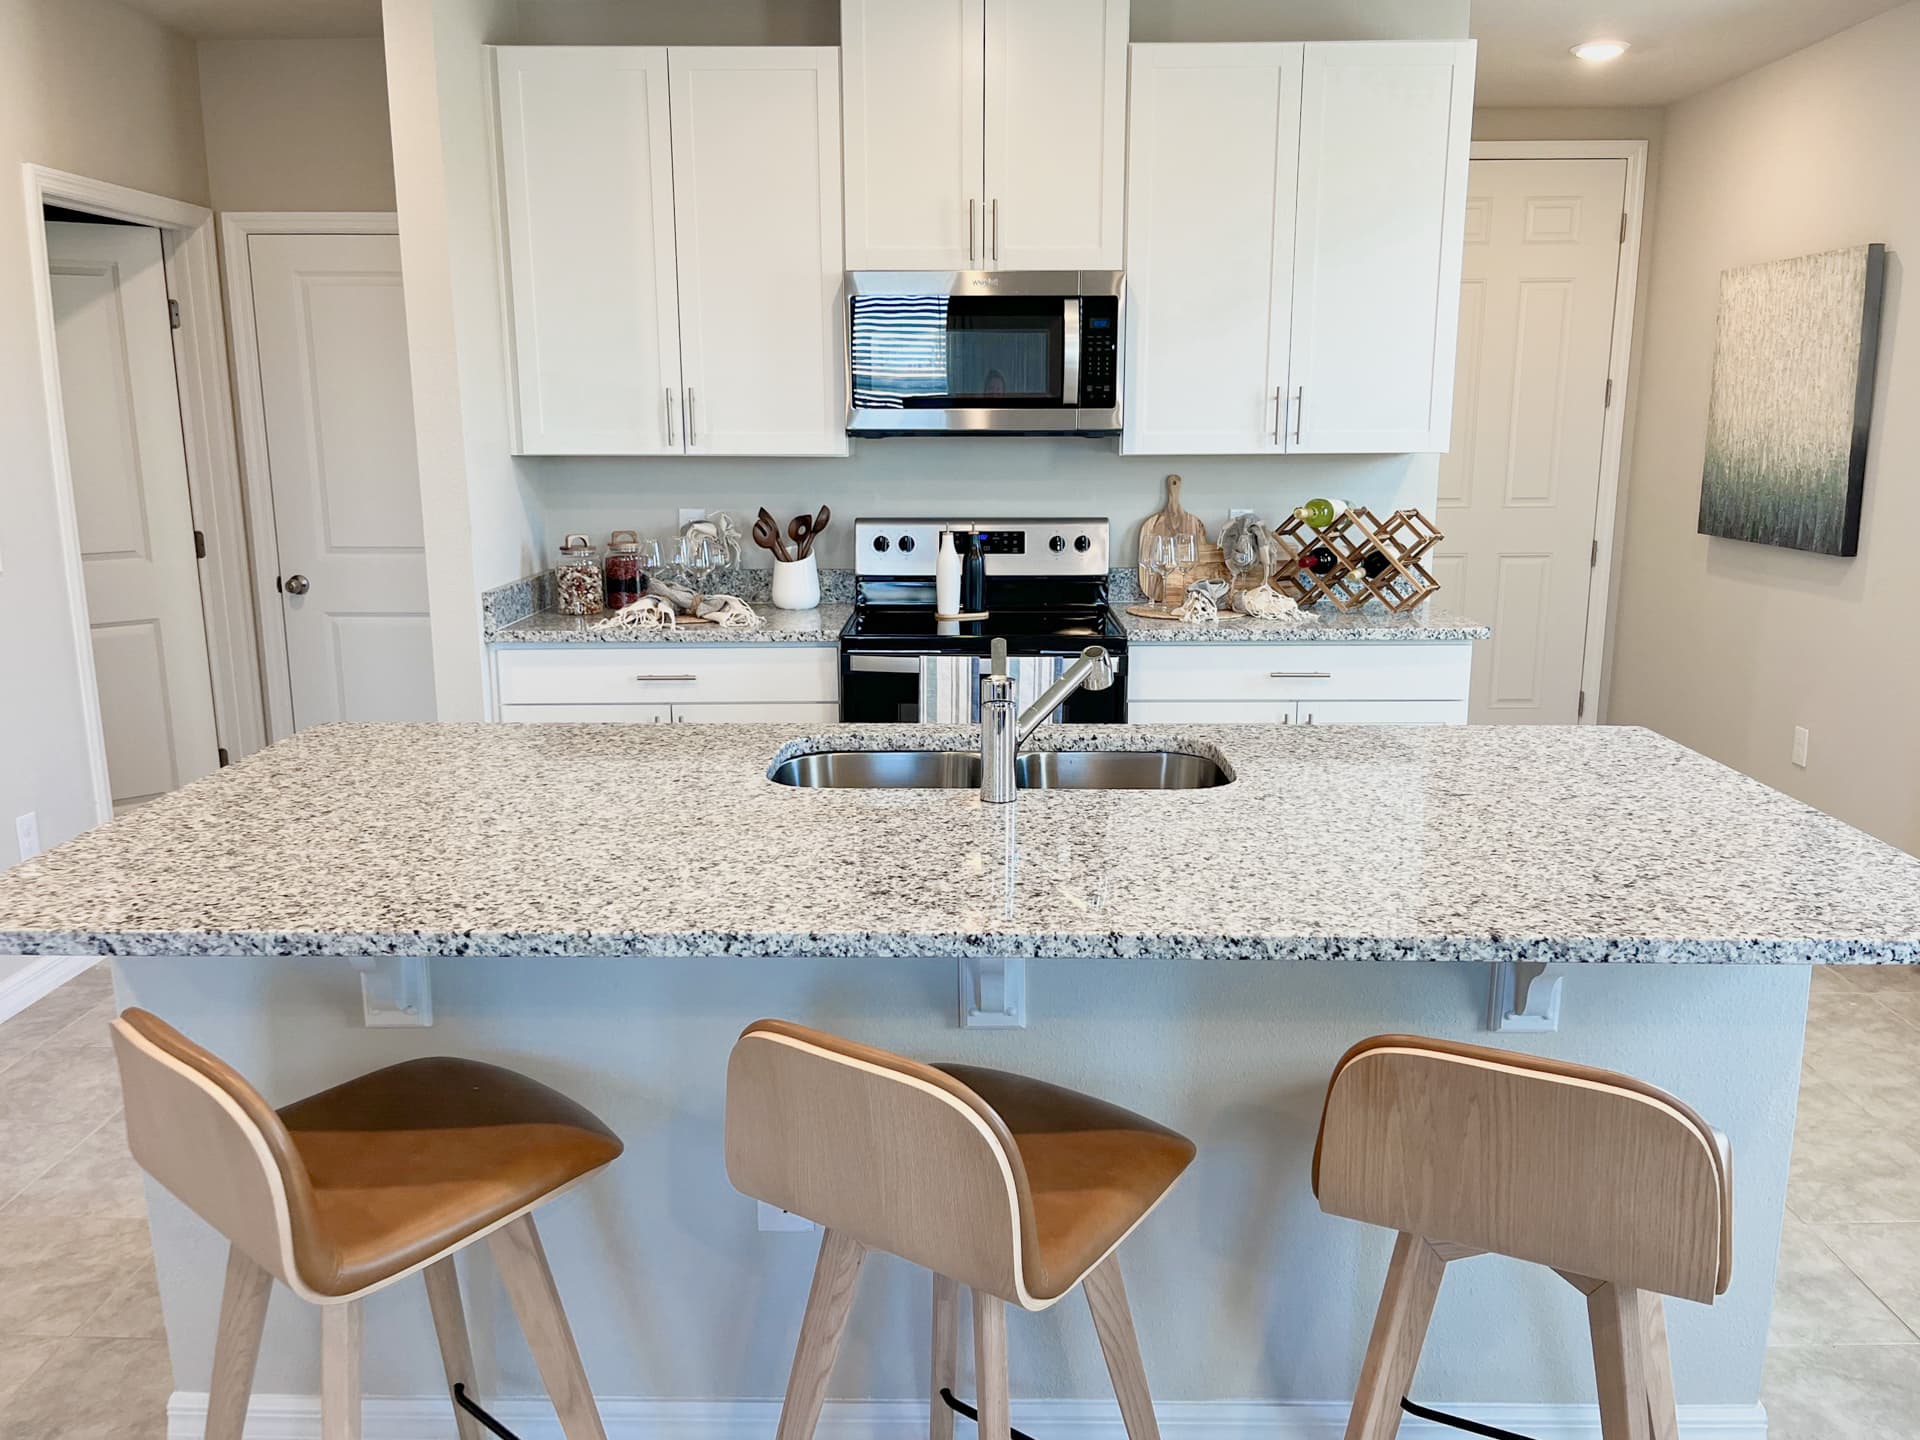 Fully equipped kitchen with large center island featuring sink and countertop seating